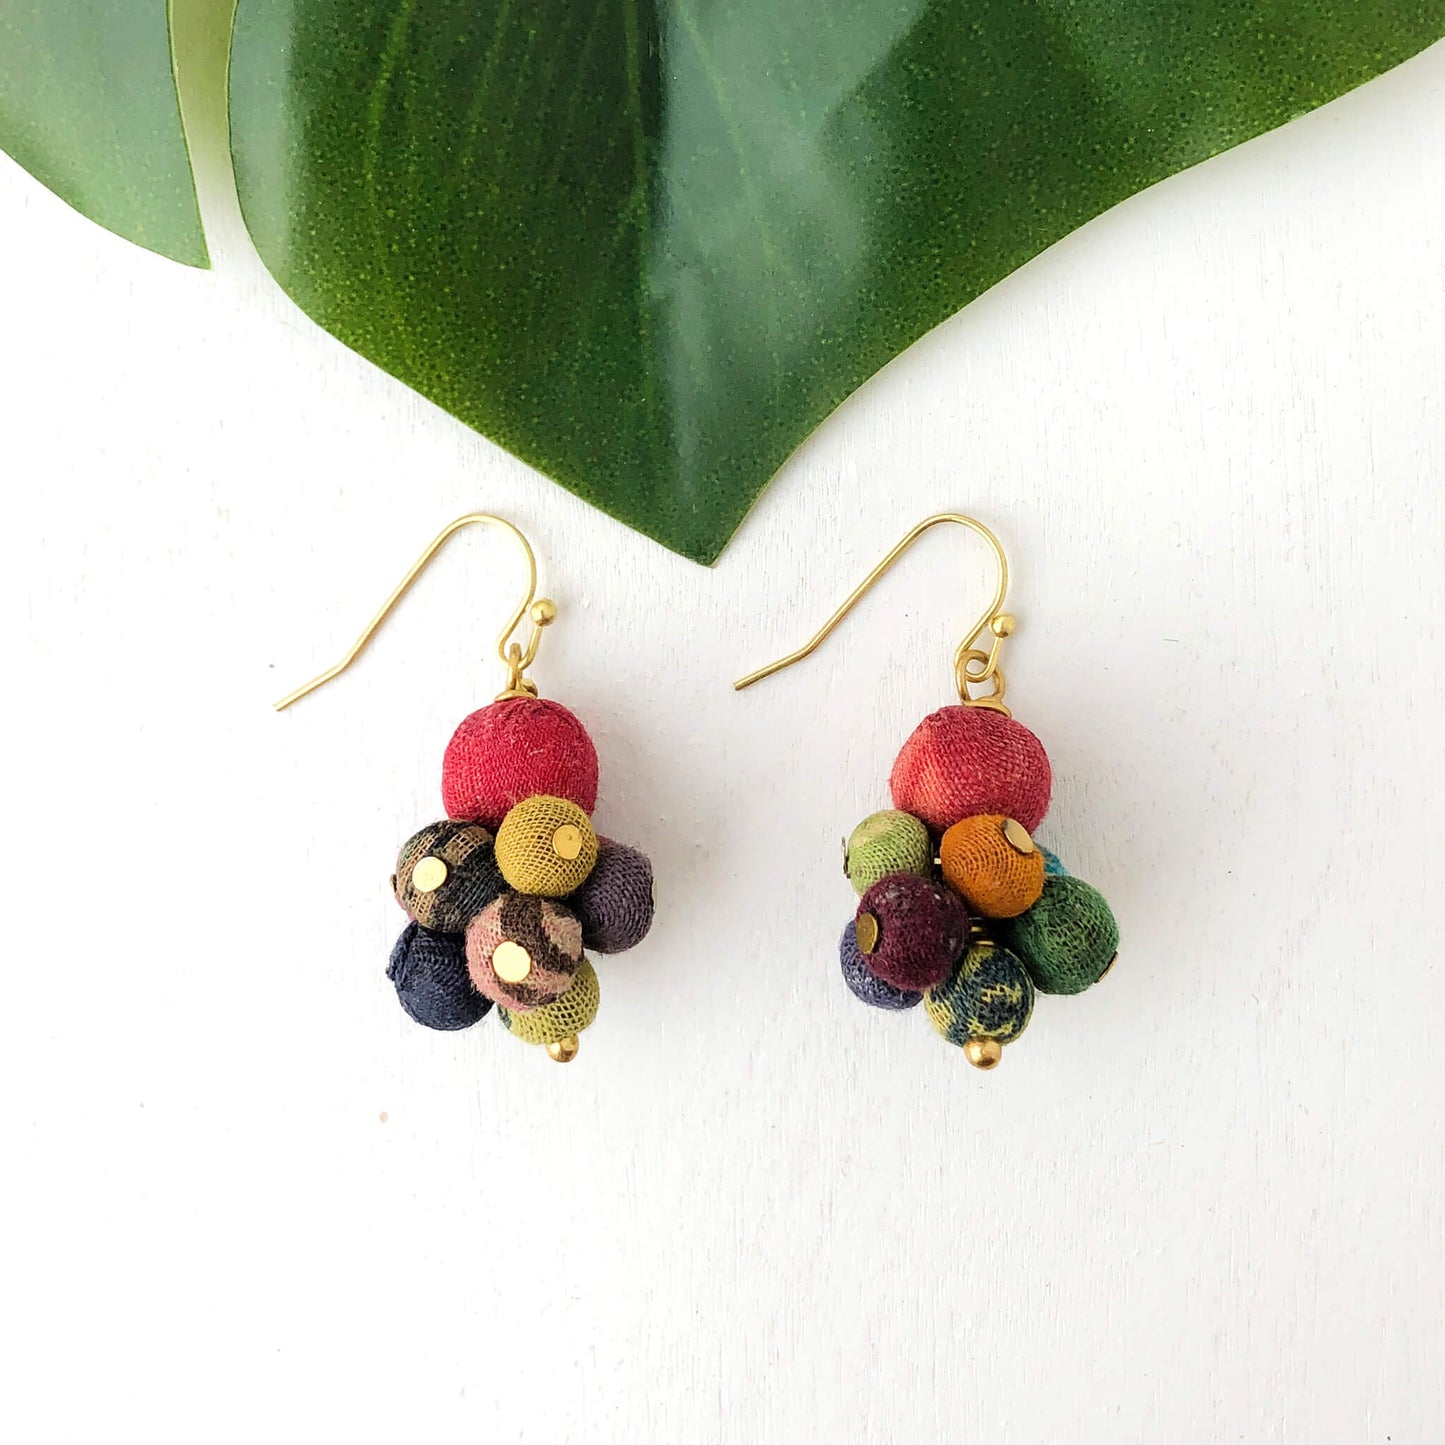 A bundle of small colorful textile-wrapped beads dangles from a larger bead to form these earrings.